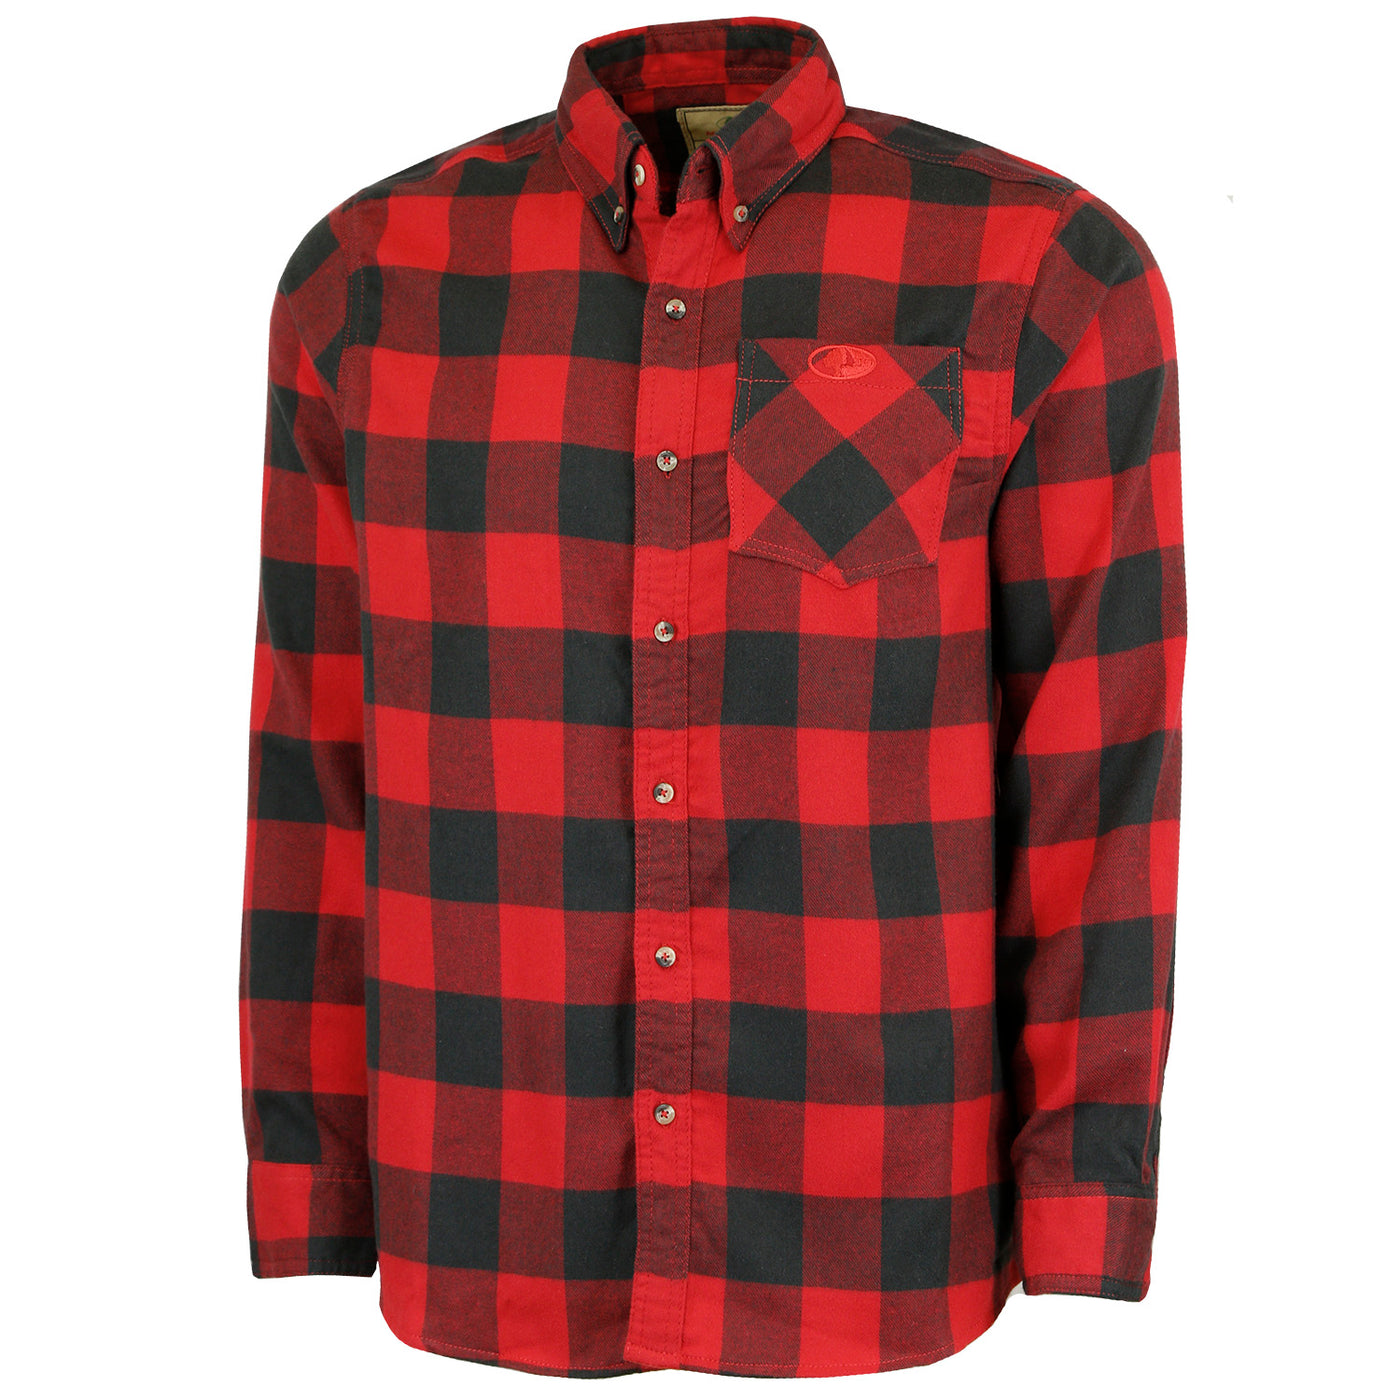 Mossy Oak Men's Thermal Lined Plaid Flannel Shirt – The Mossy Oak Store